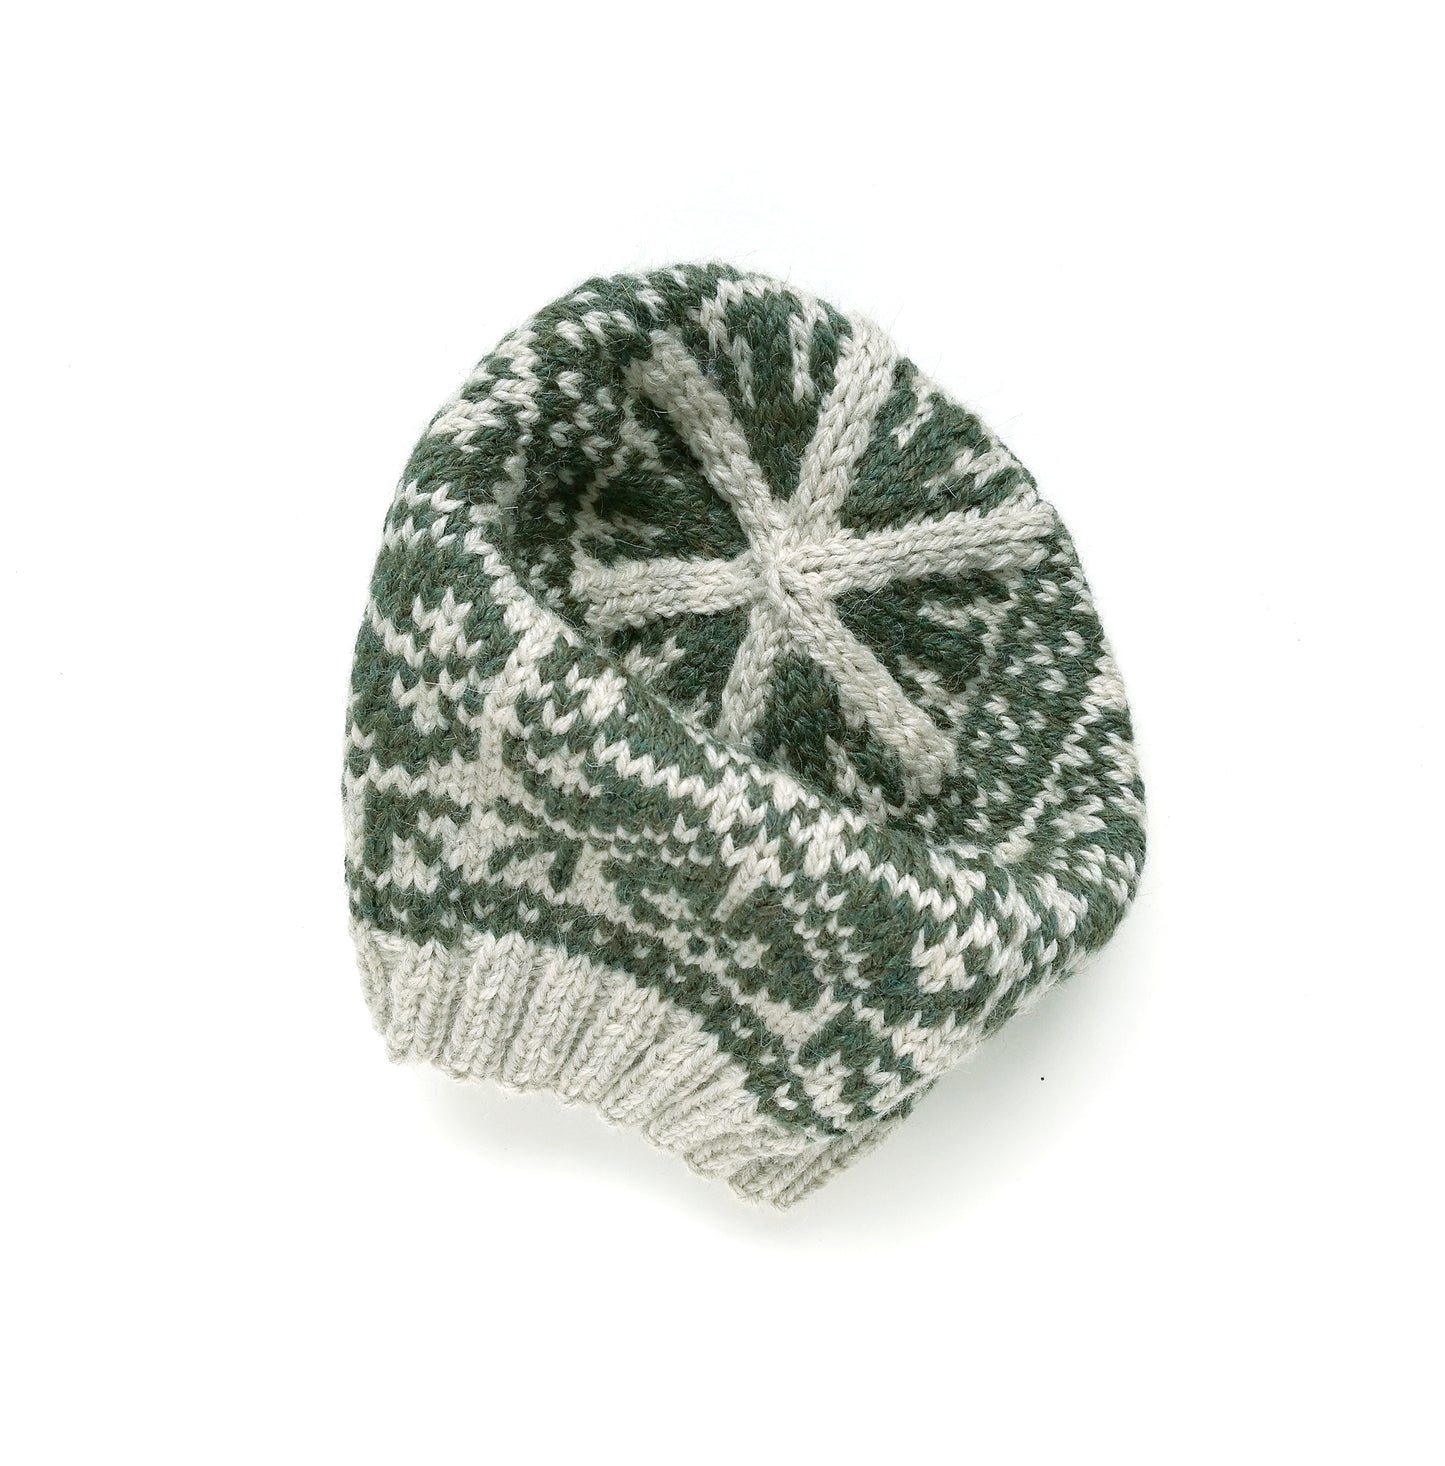 beige and green wool hand-knitted Fair Isle beanie hat in snowflake knitting pattern top view